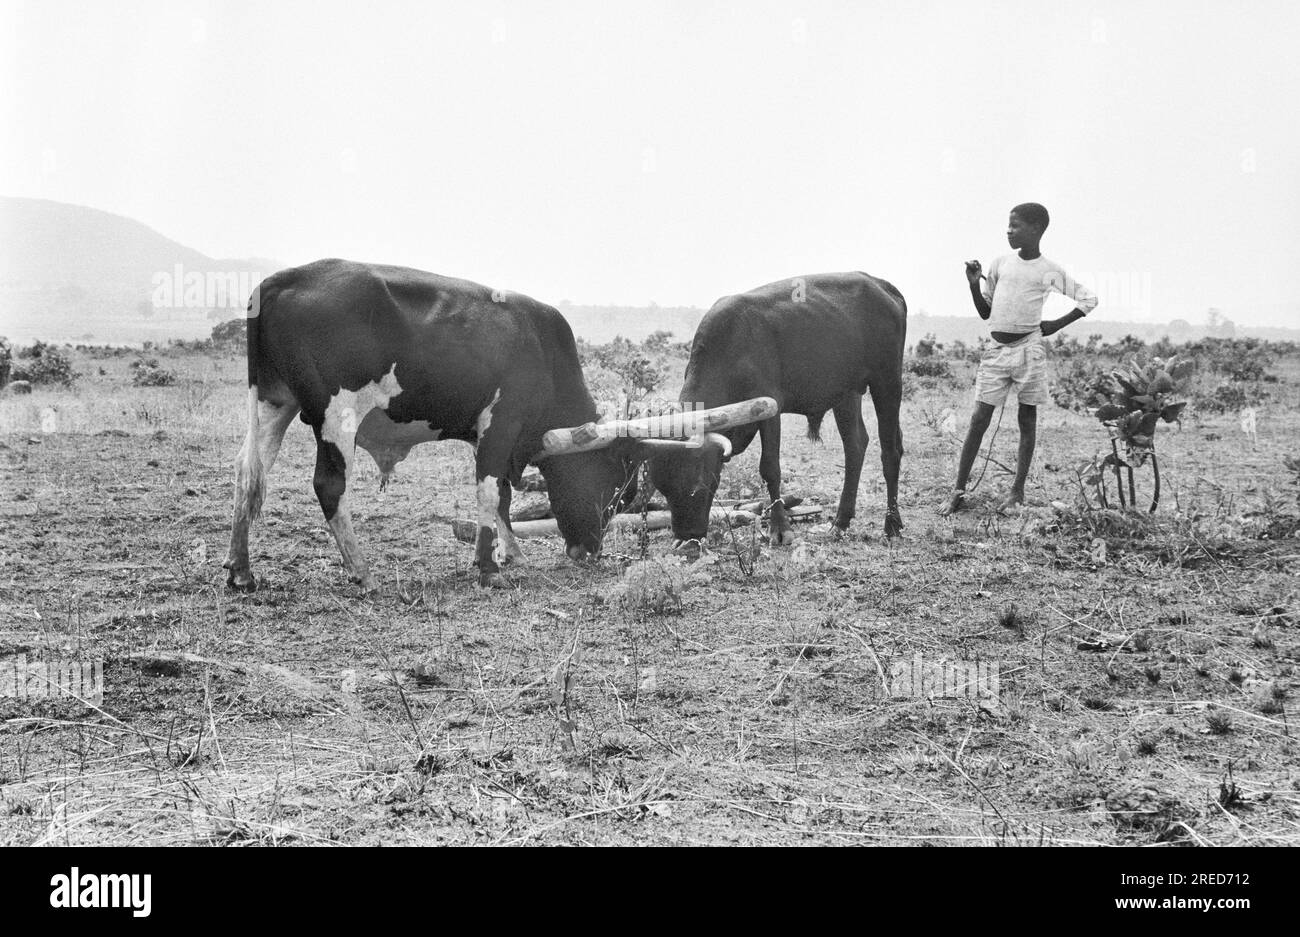 Angola, Huambo, 27/09/1992 Archive: 36-80-14 Parliamentary elections Photo: young man with his cows [automated translation] Stock Photo